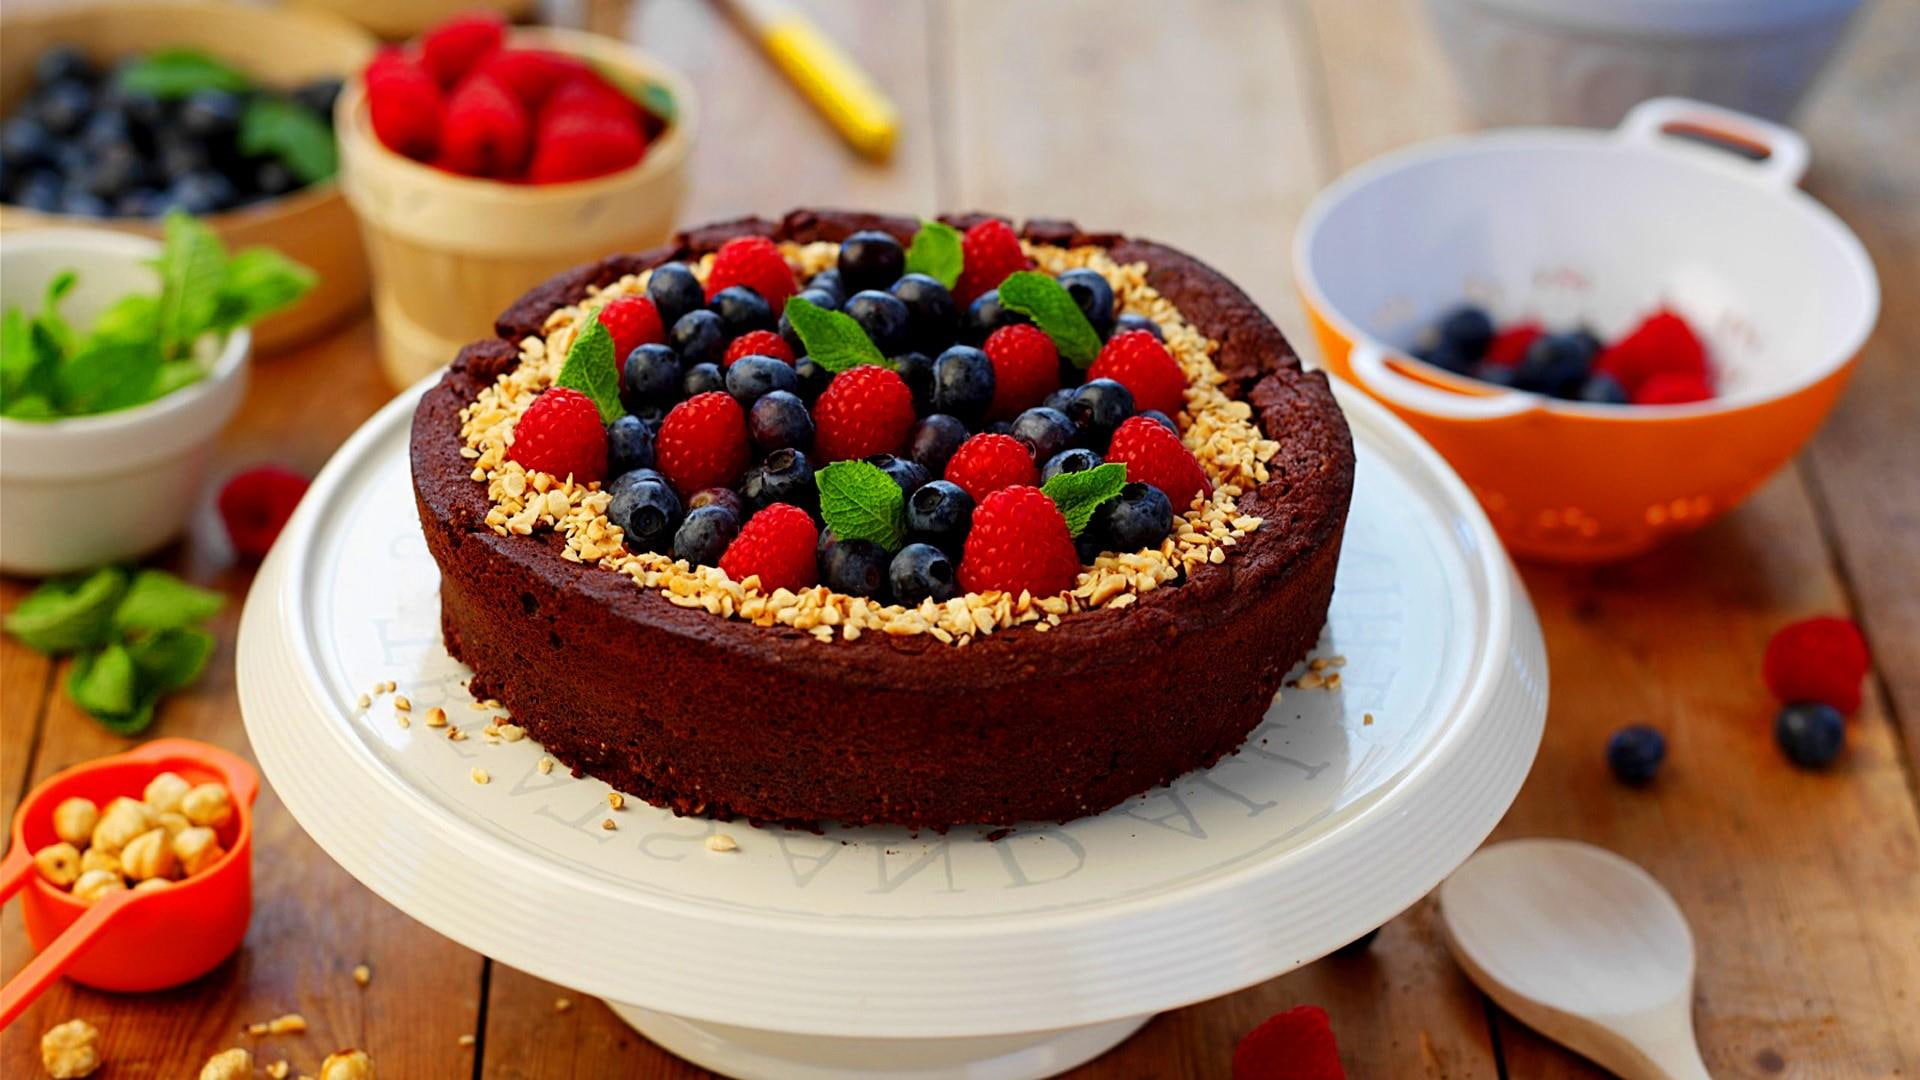 berries, cake, table, yummy, delicious, toothsome, food